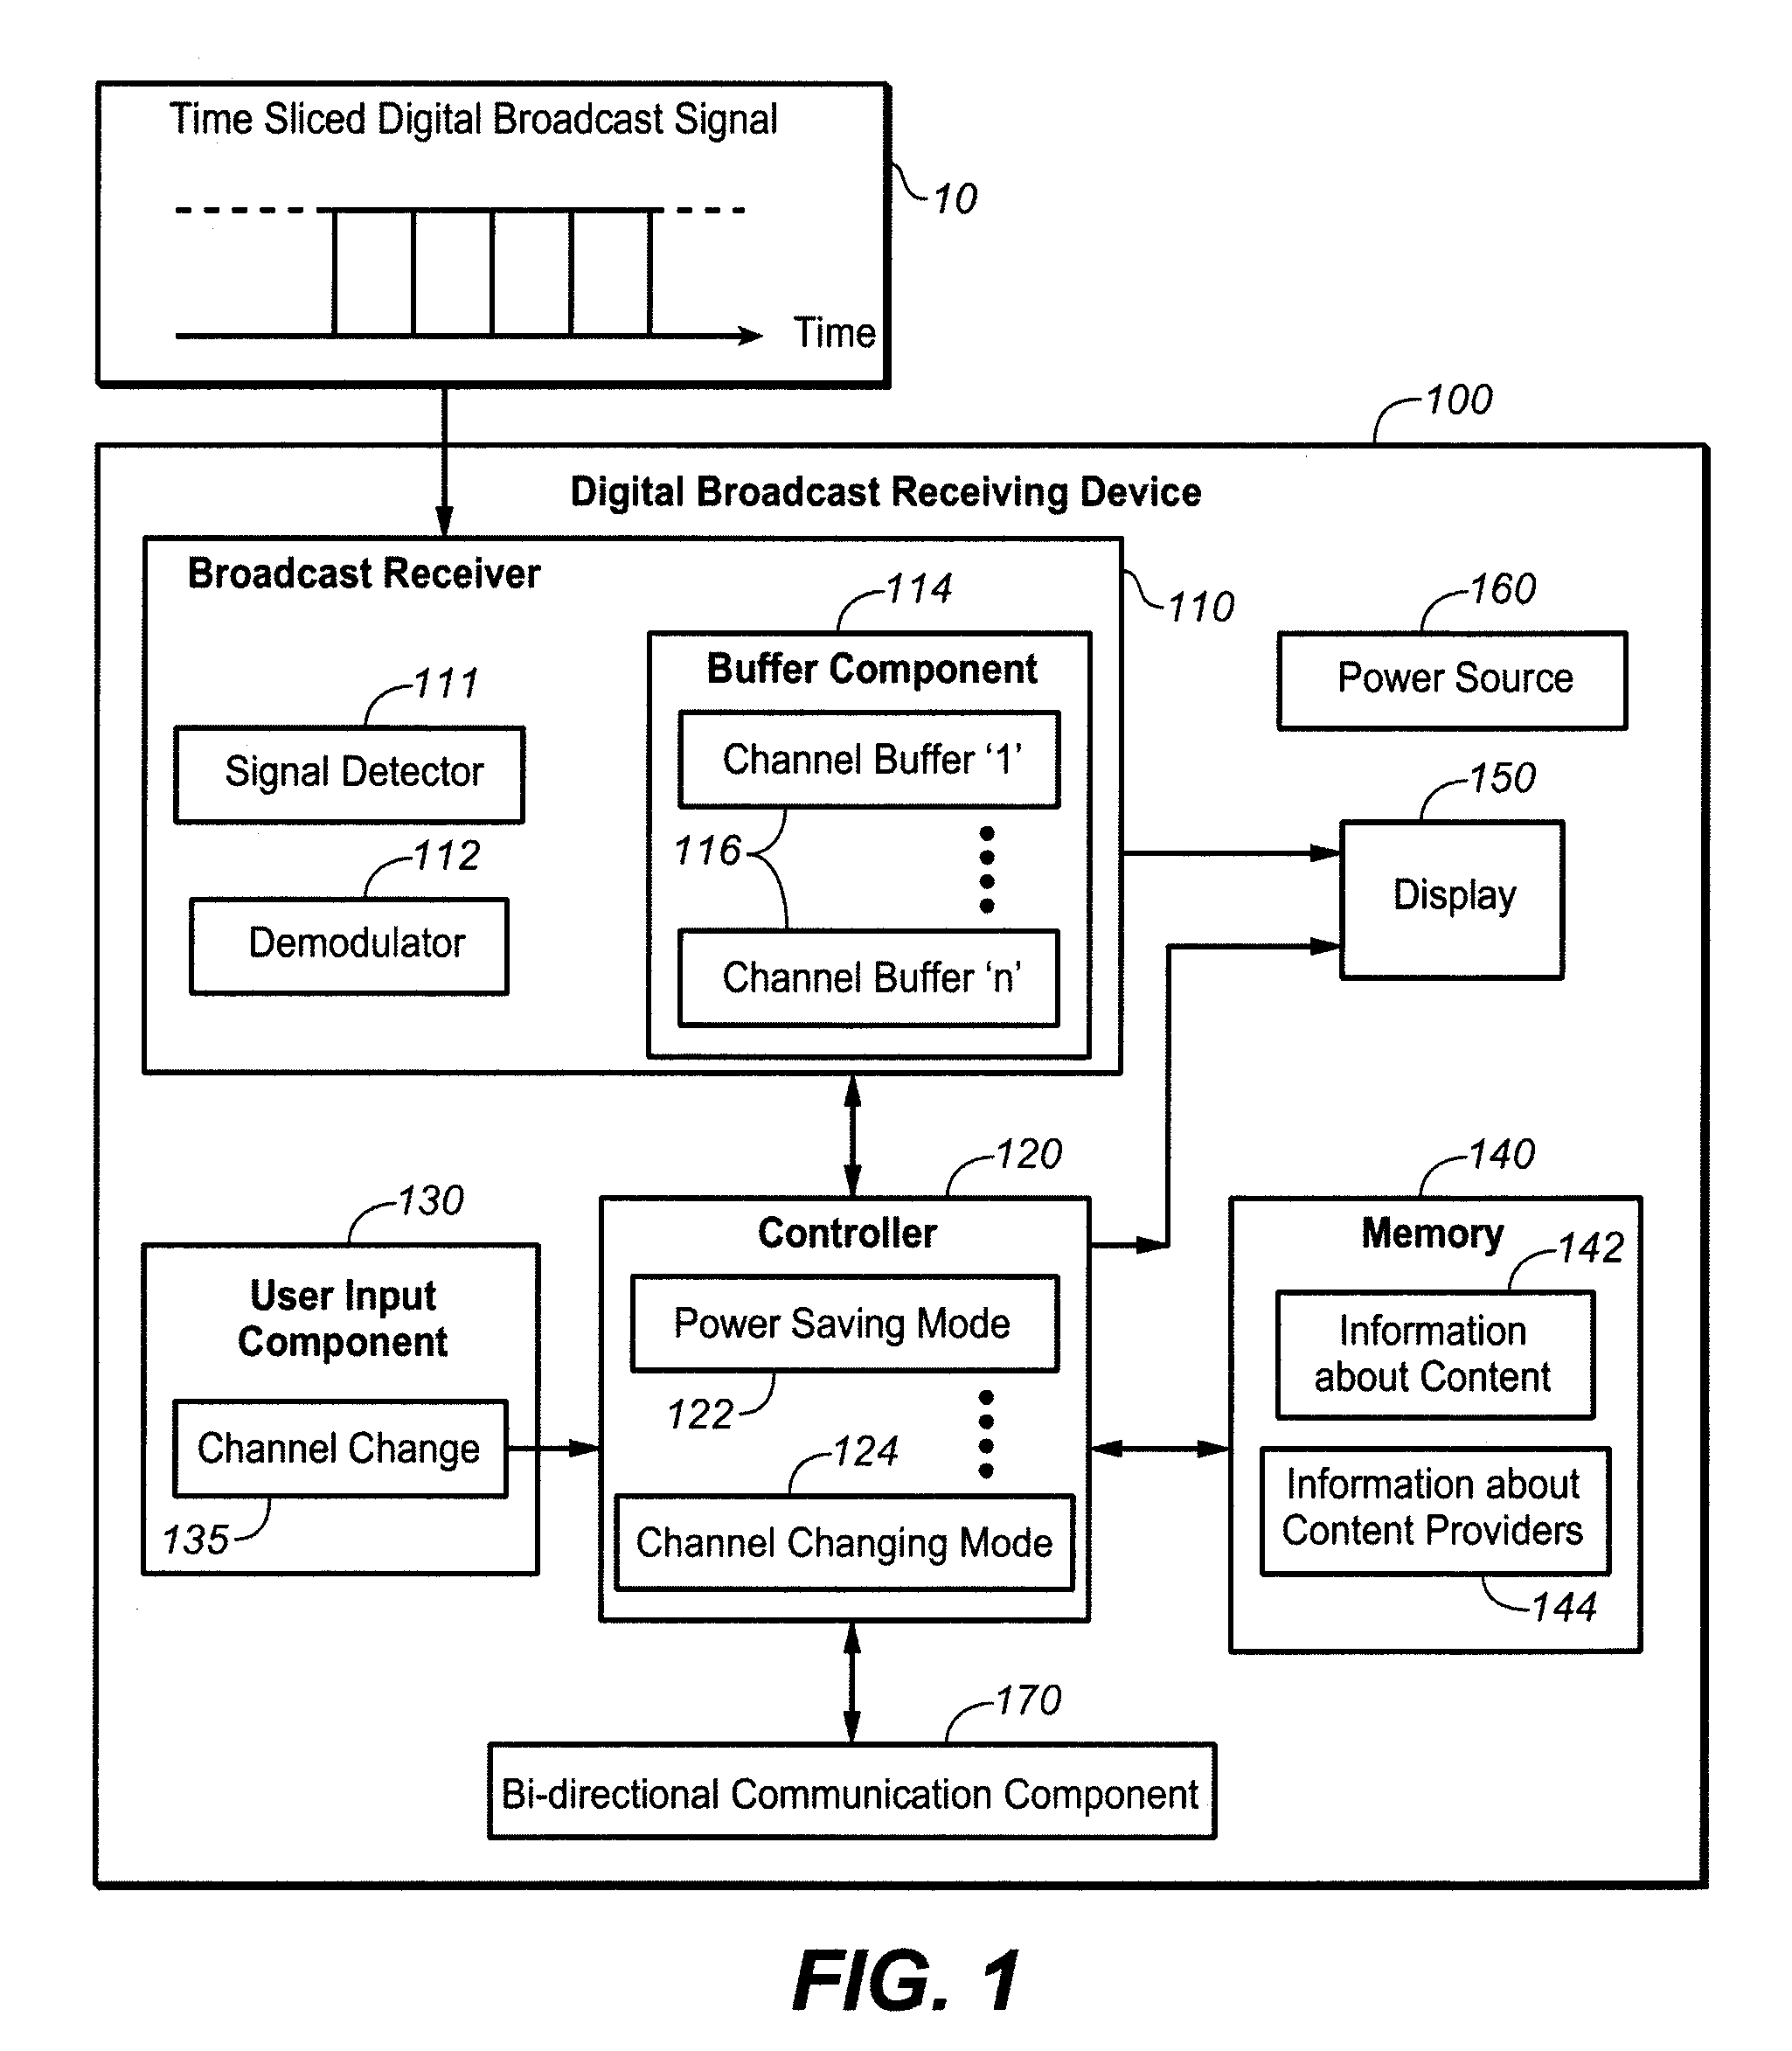 Changing channels in a digital broadcast system